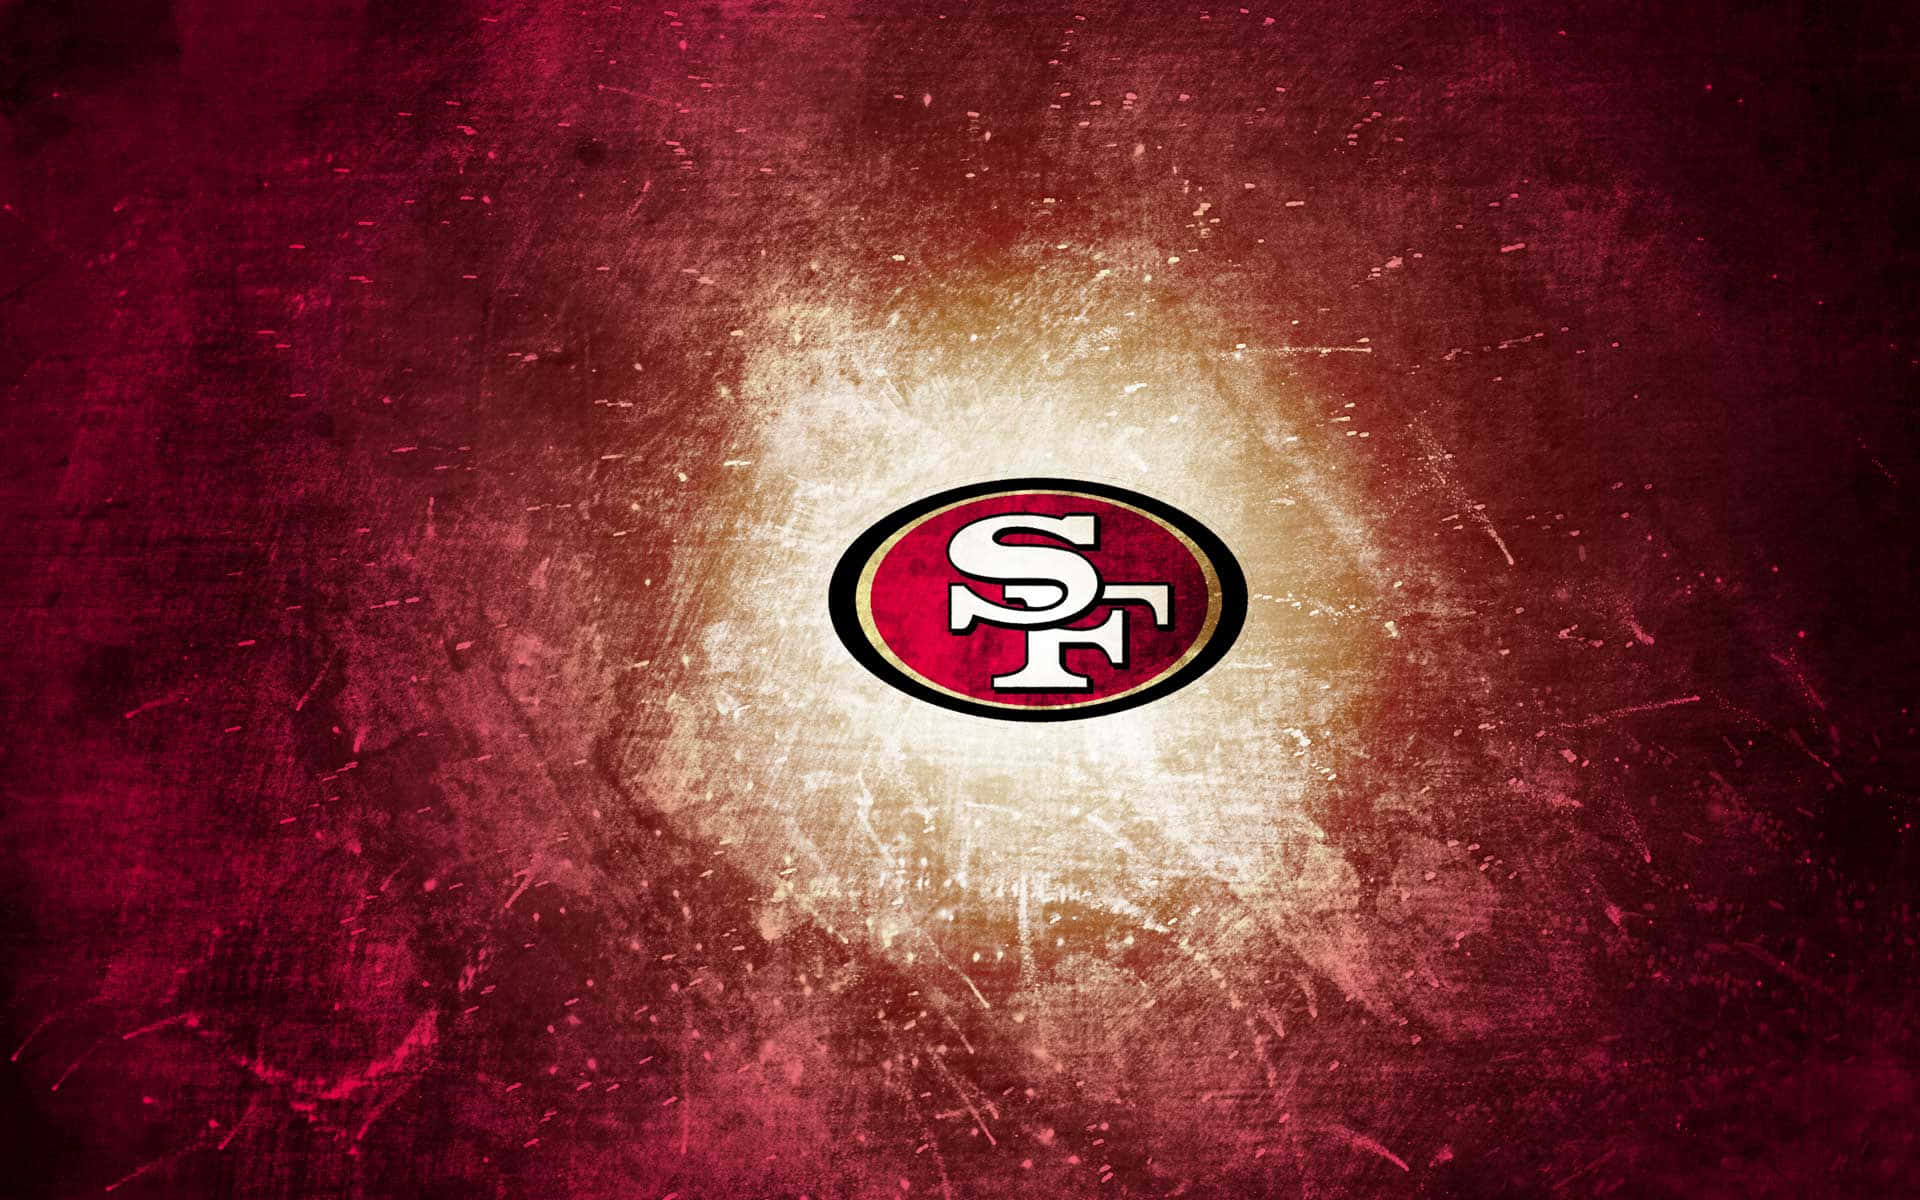 Celebrate the San Francisco 49ers with this epic background